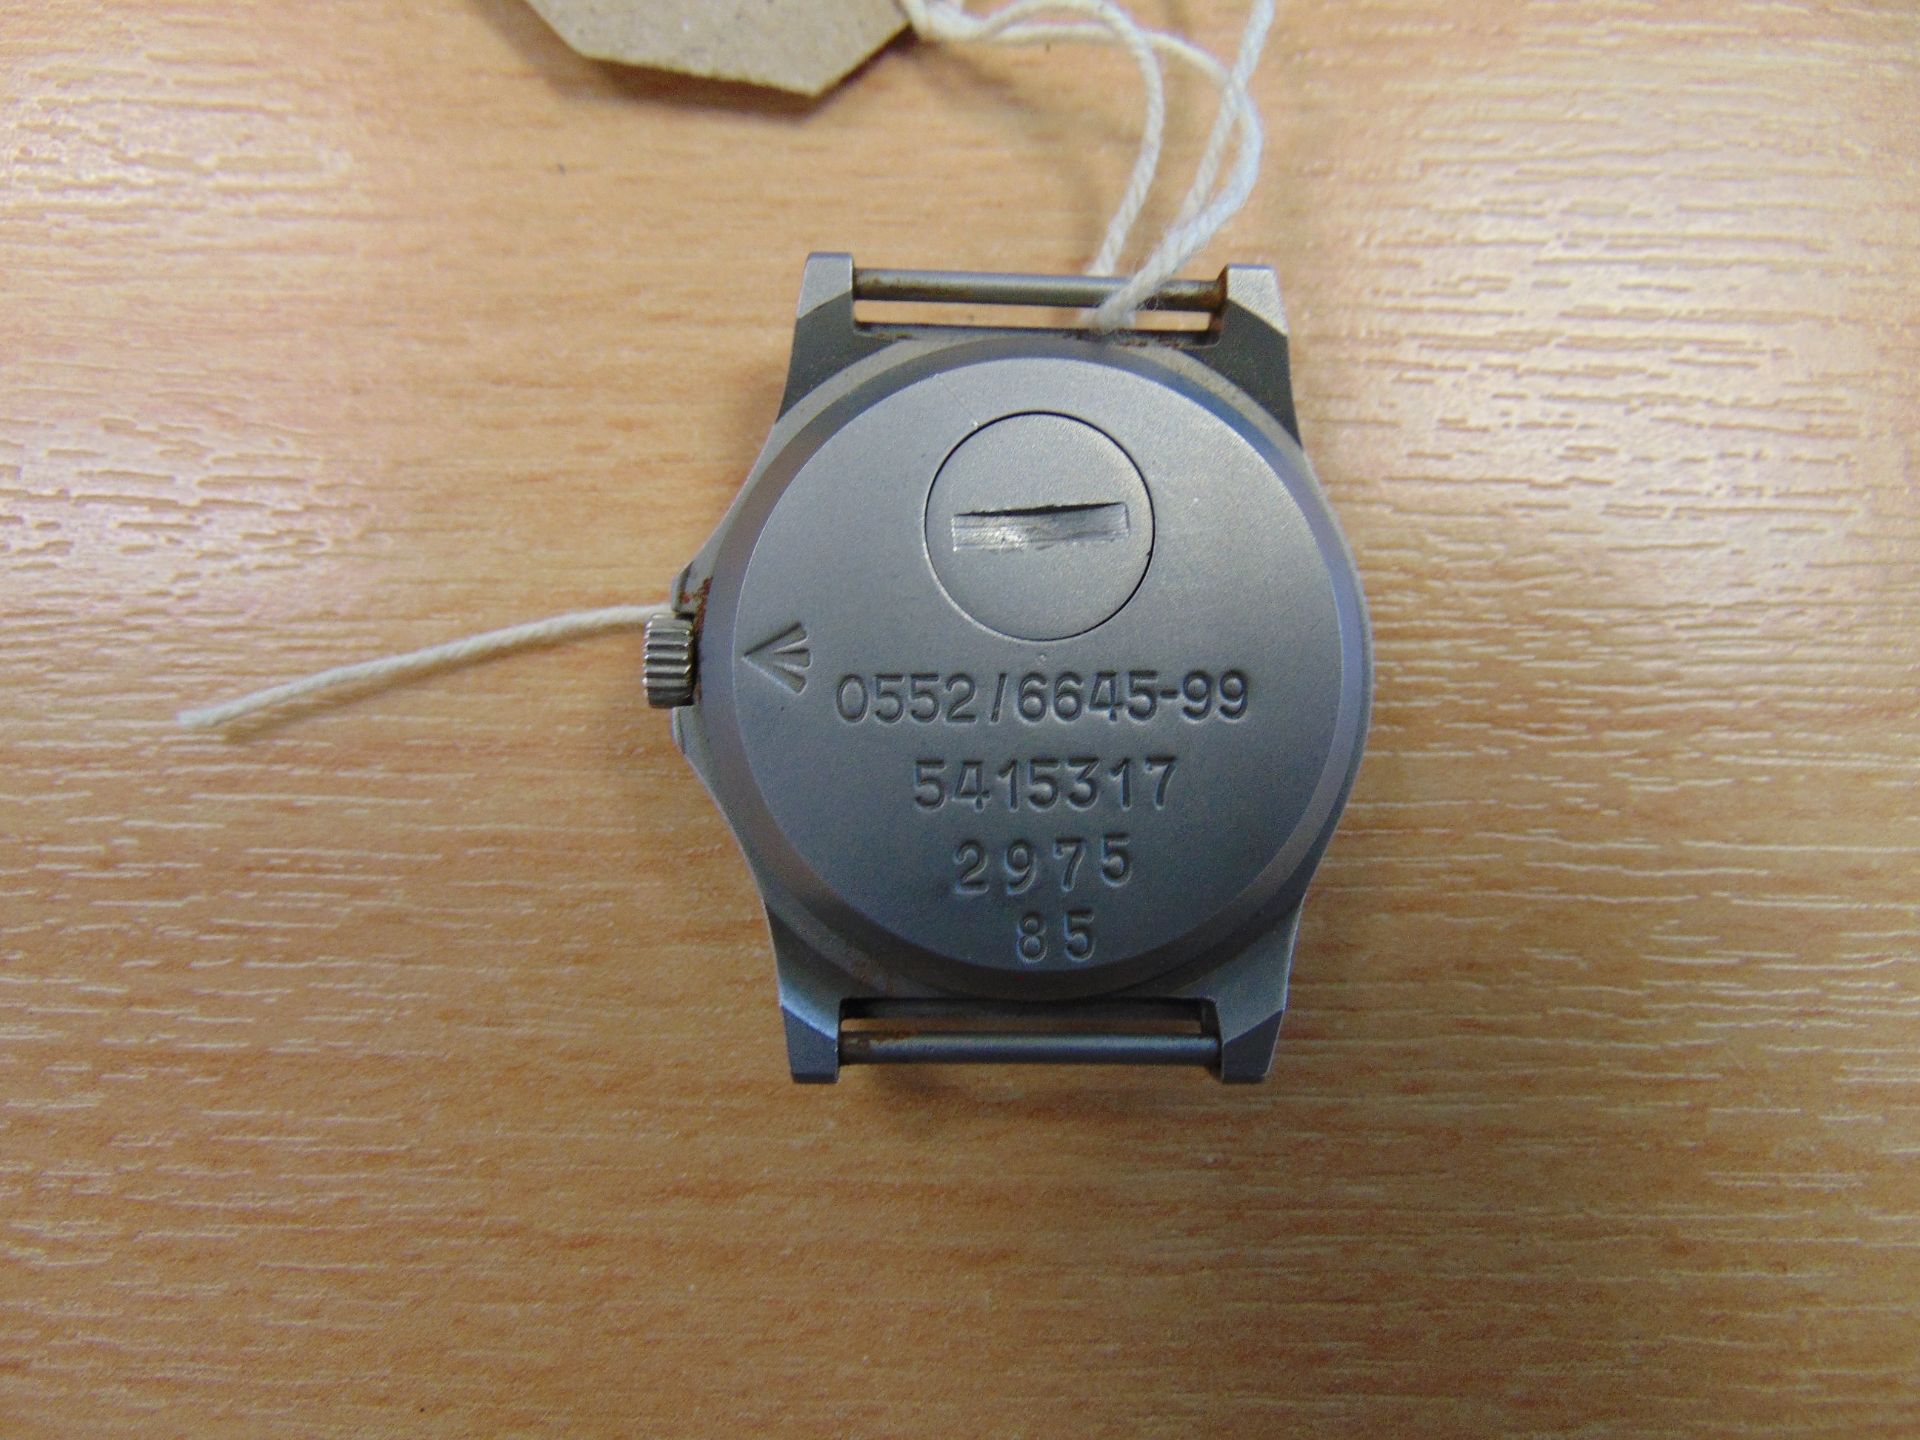 V Nice CWC 0552 Royal Marines Navy Issue Service Watch FAT BOY, Date 1985 - Image 3 of 4